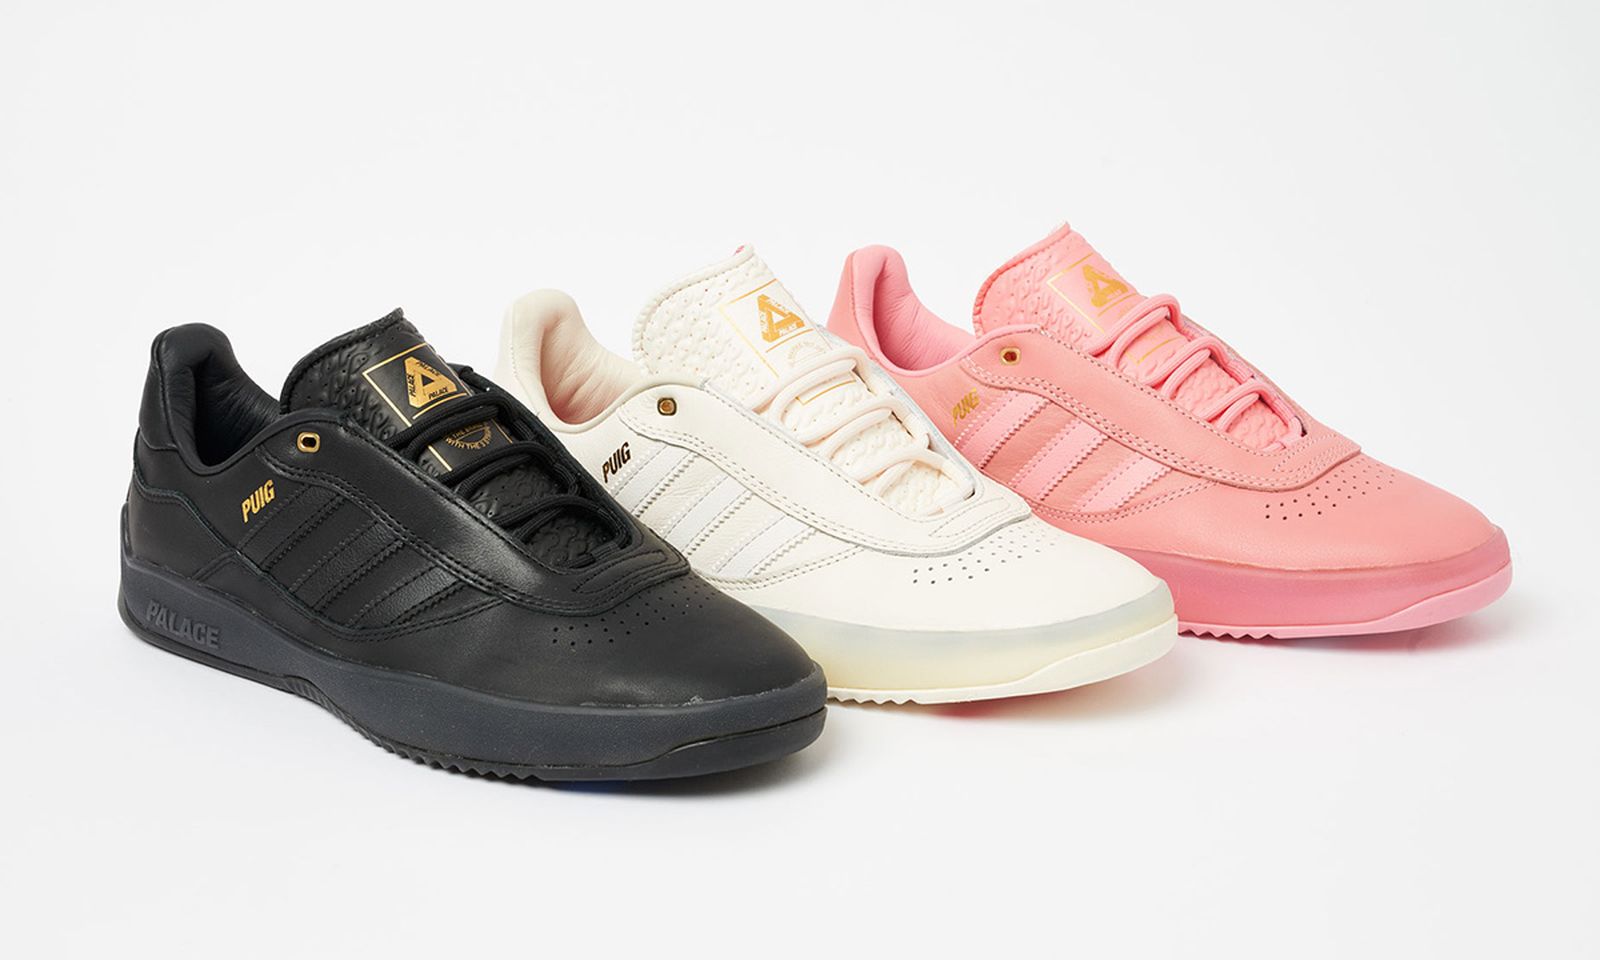 Palace x adidas PUIG: When & Where to Buy Today